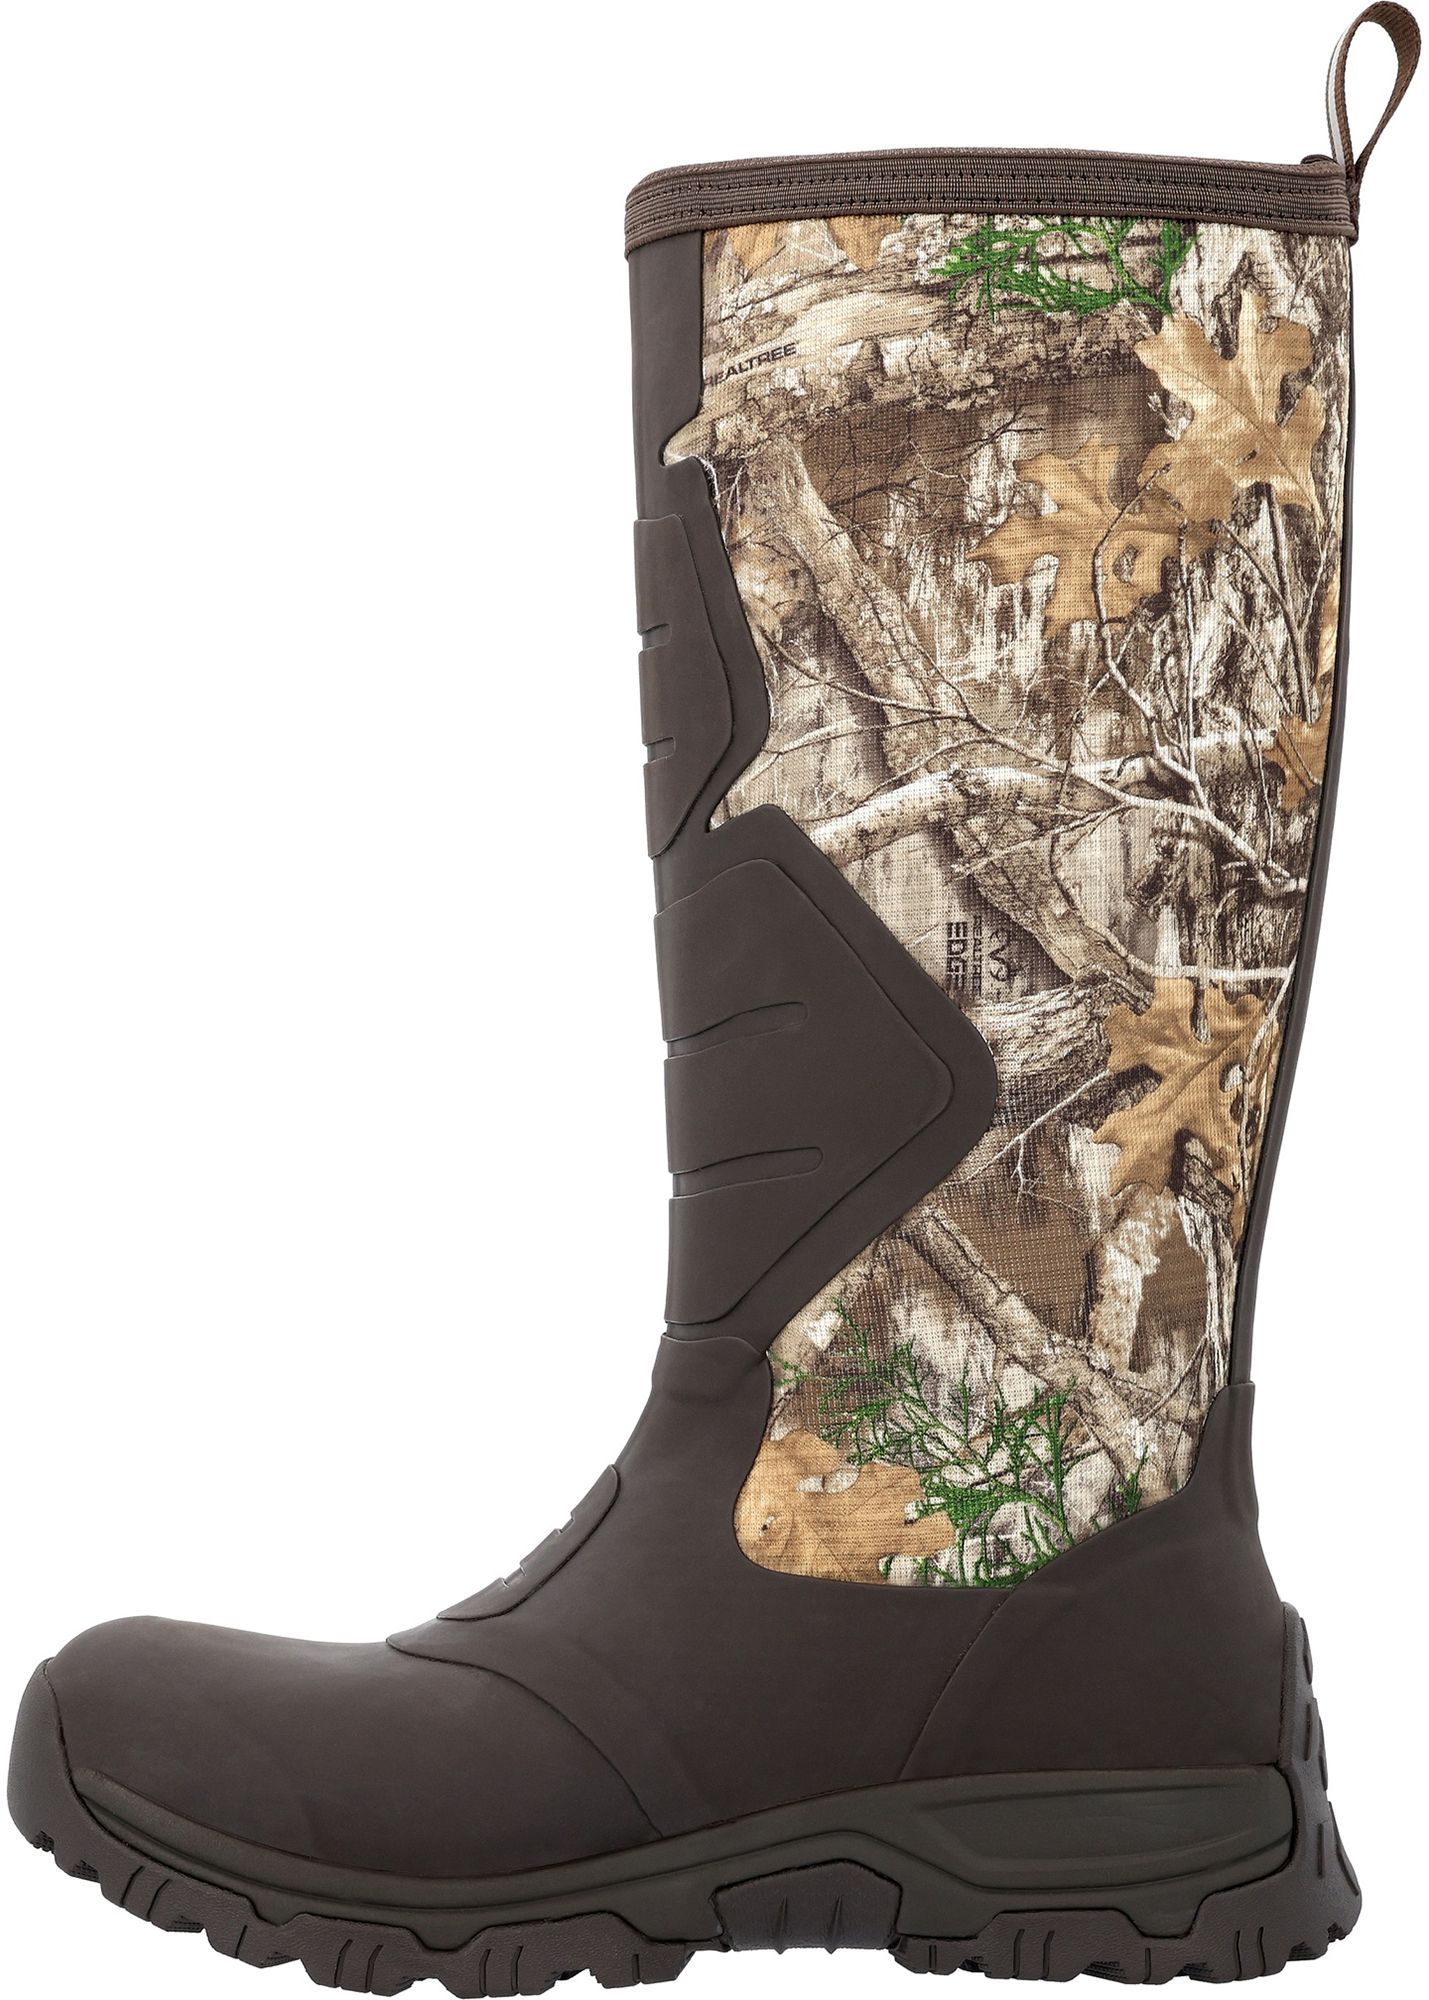 Muck Boots Men's Apex PRO Realtree EDGE Insulated Waterproof Boots